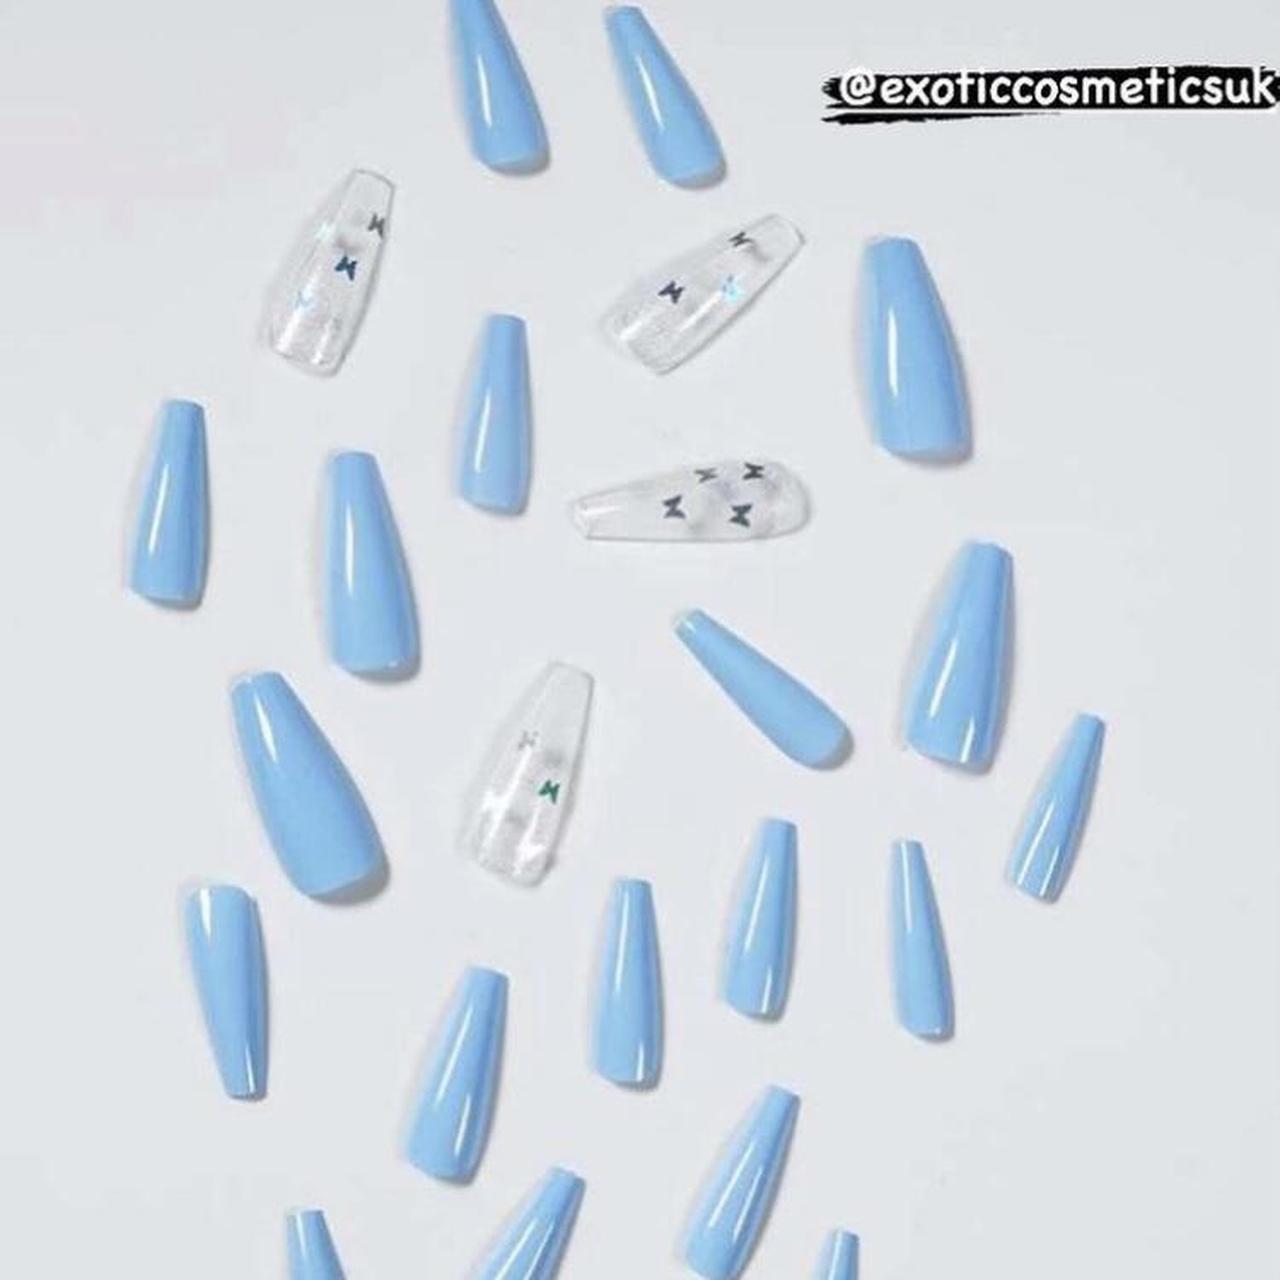 Product Image 1 - Butterfly press on nails 
Comes